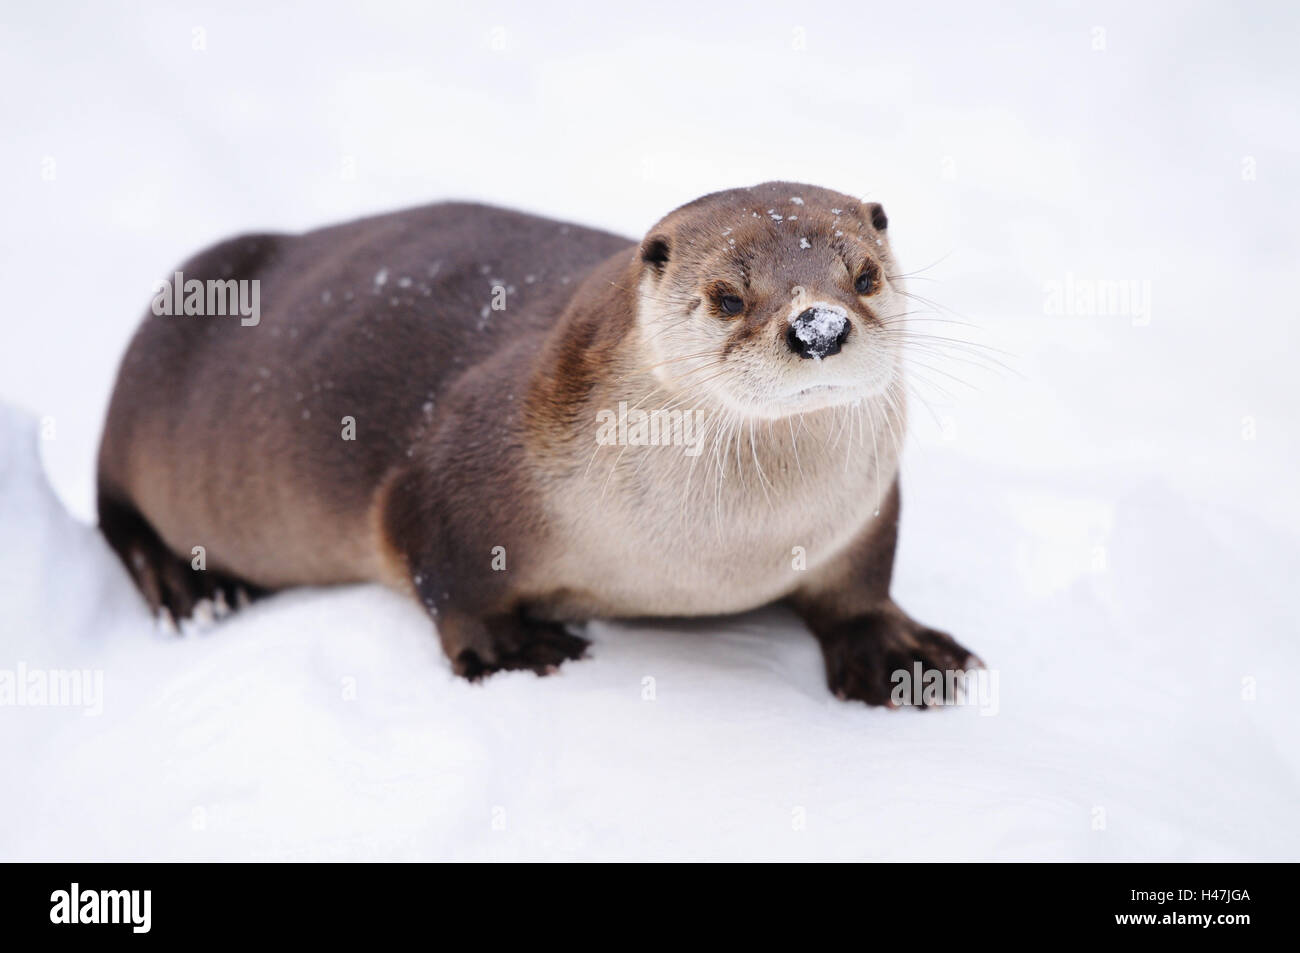 North American otter, Lontra canadensis, view in the camera, Stock Photo